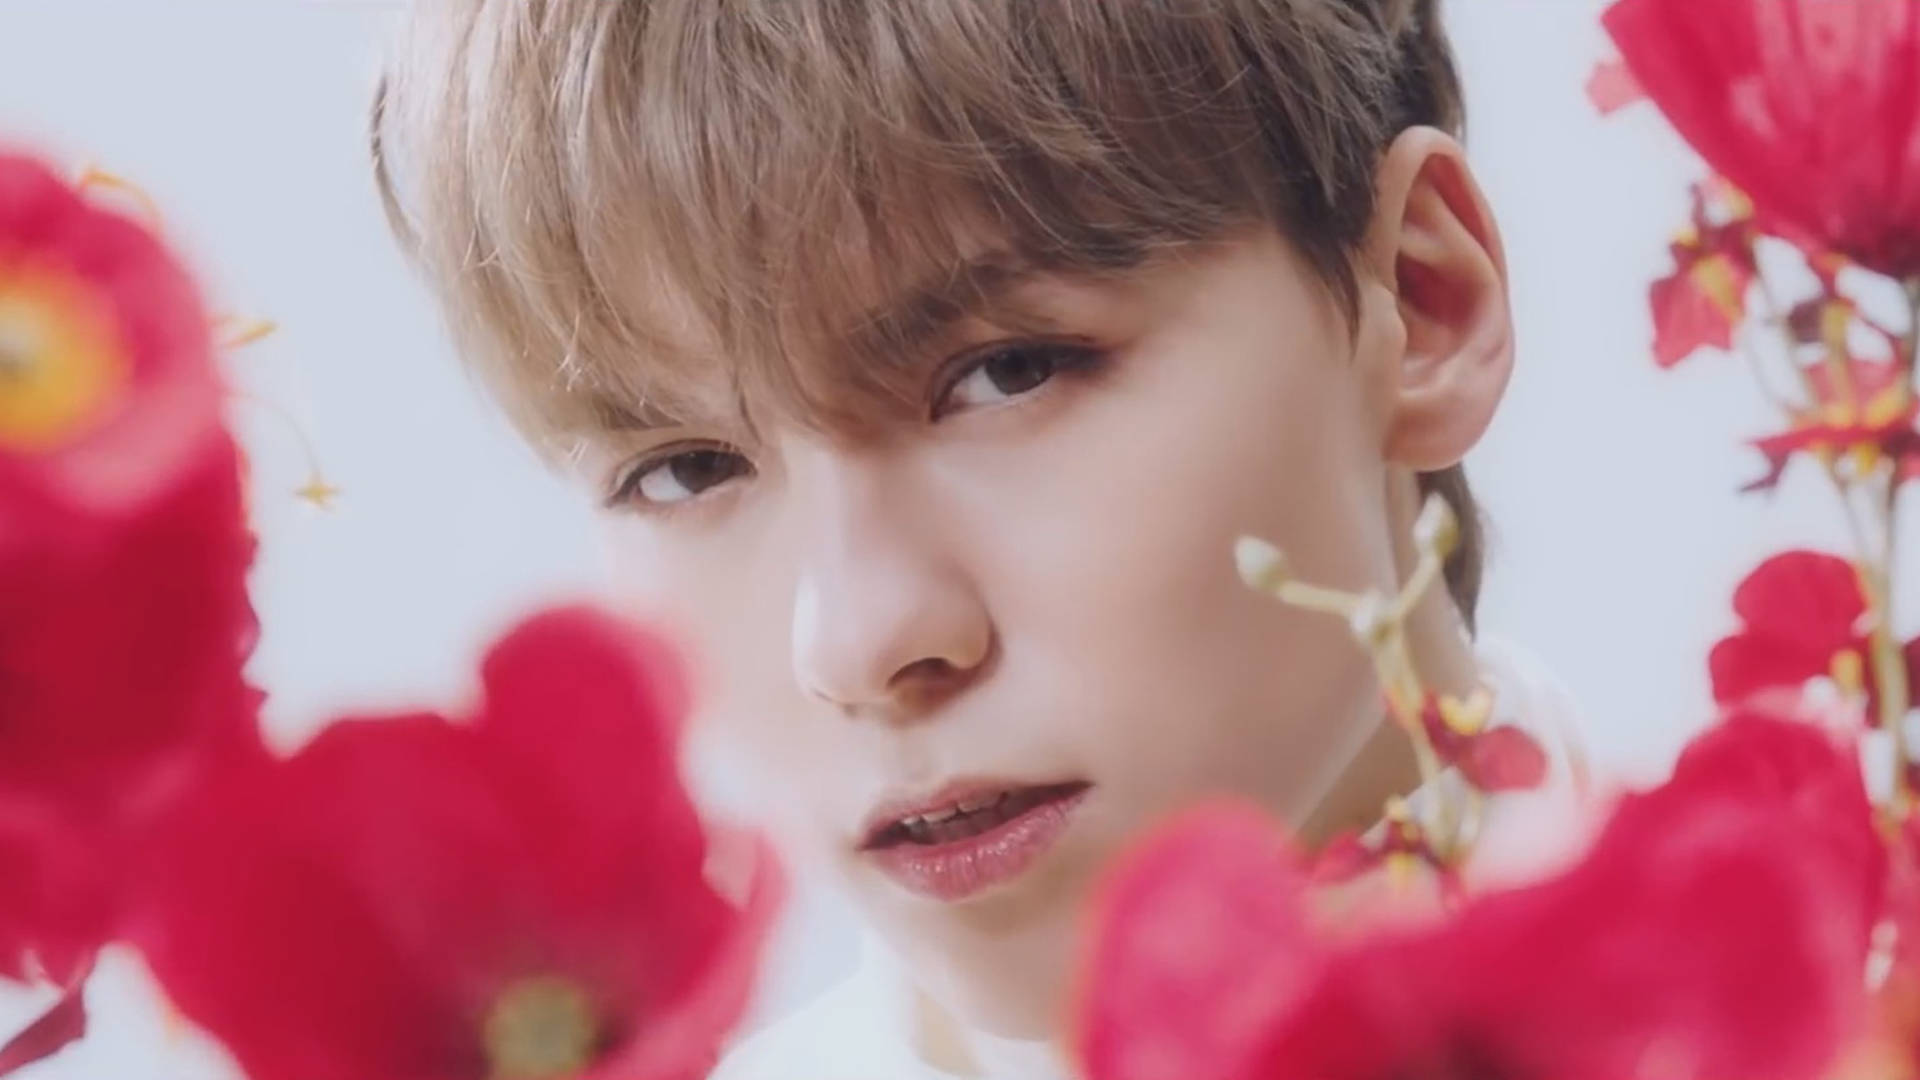 Vernon With Flowers Background